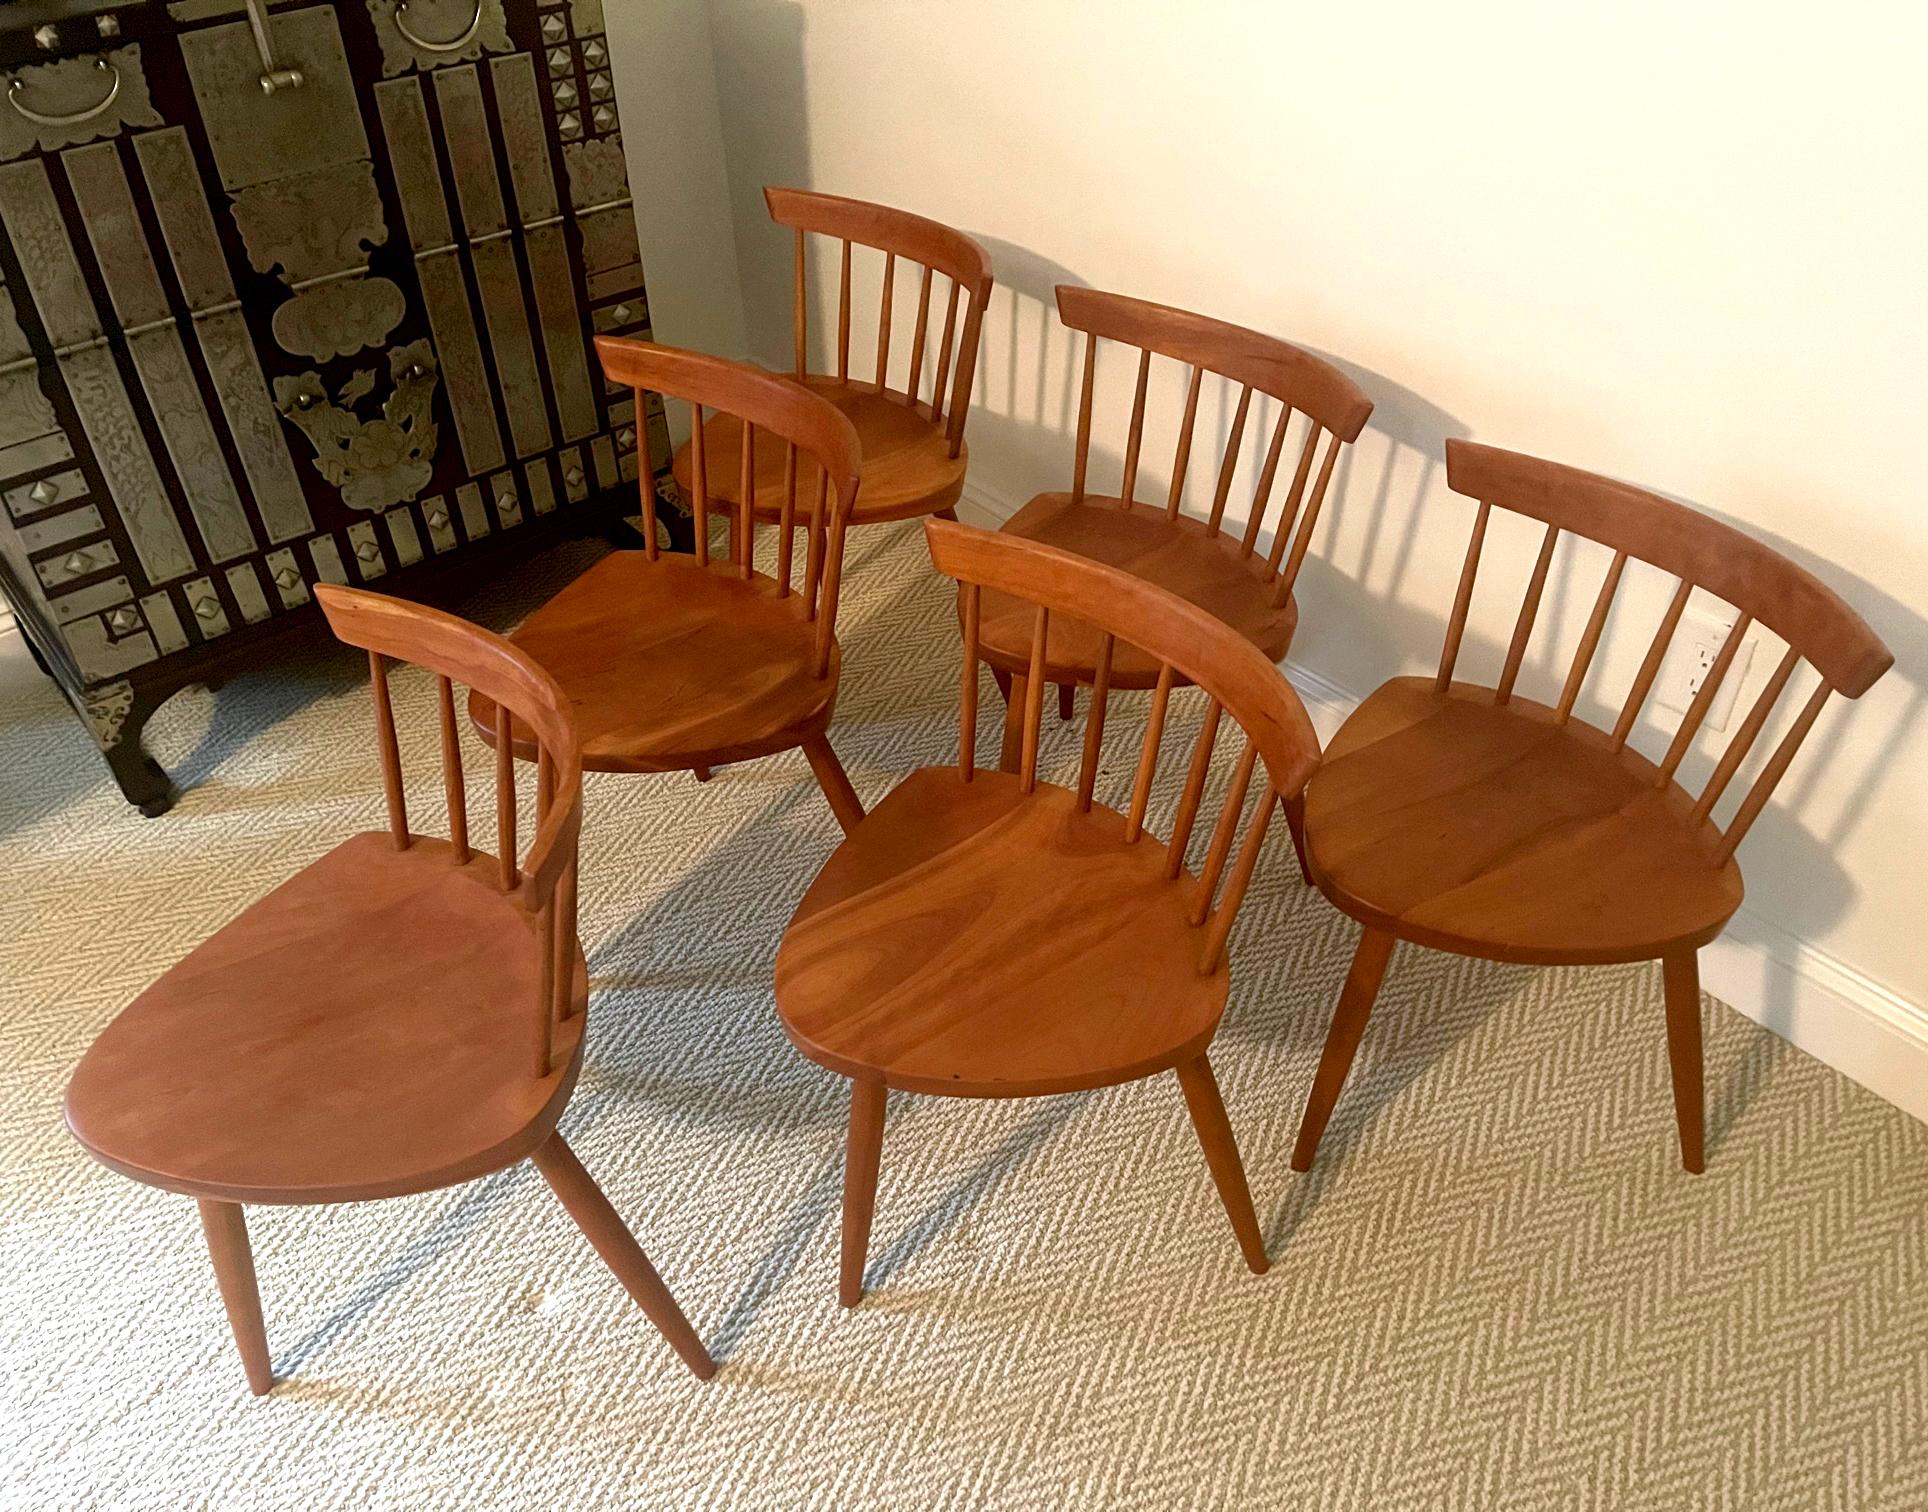 An exceptional set of six Mira chairs custom made by George Nakashima in his New Hope Studio, circa 1959. Early work that was commissioned by using cherry wood. The Mira chair was named after George's daughter Mira and designed to be light and